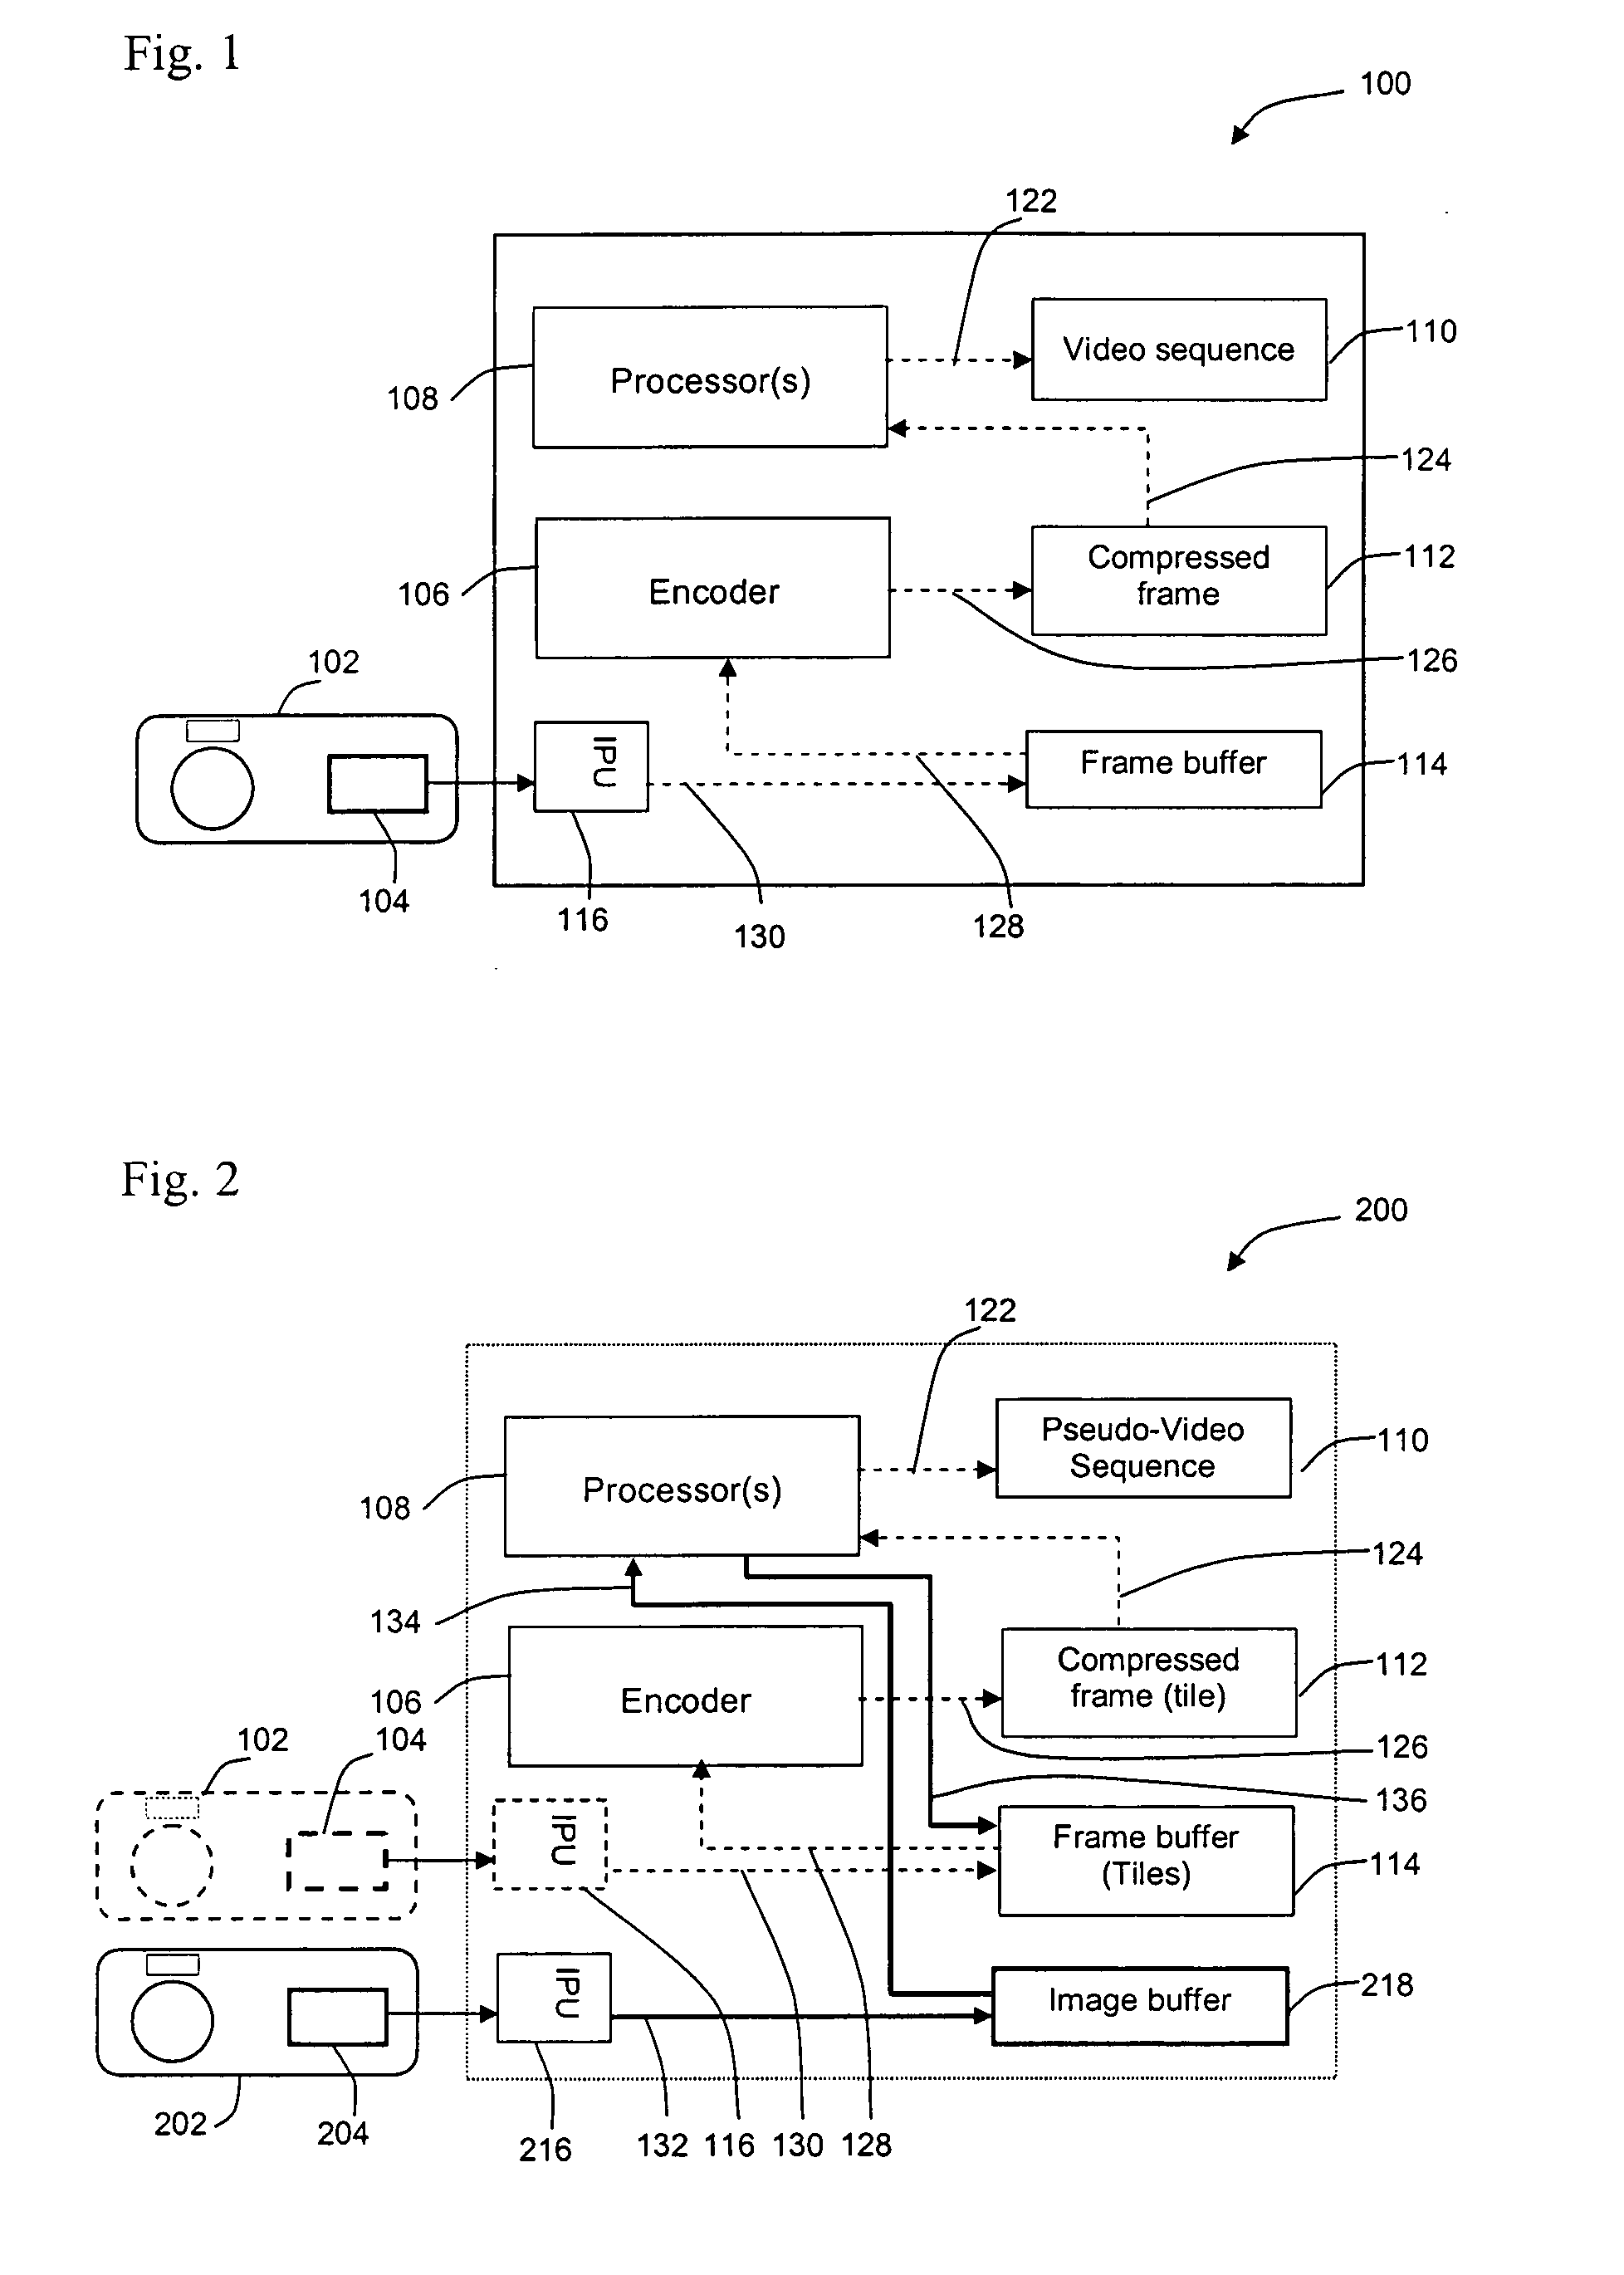 Architecture for image compression in a video hardware